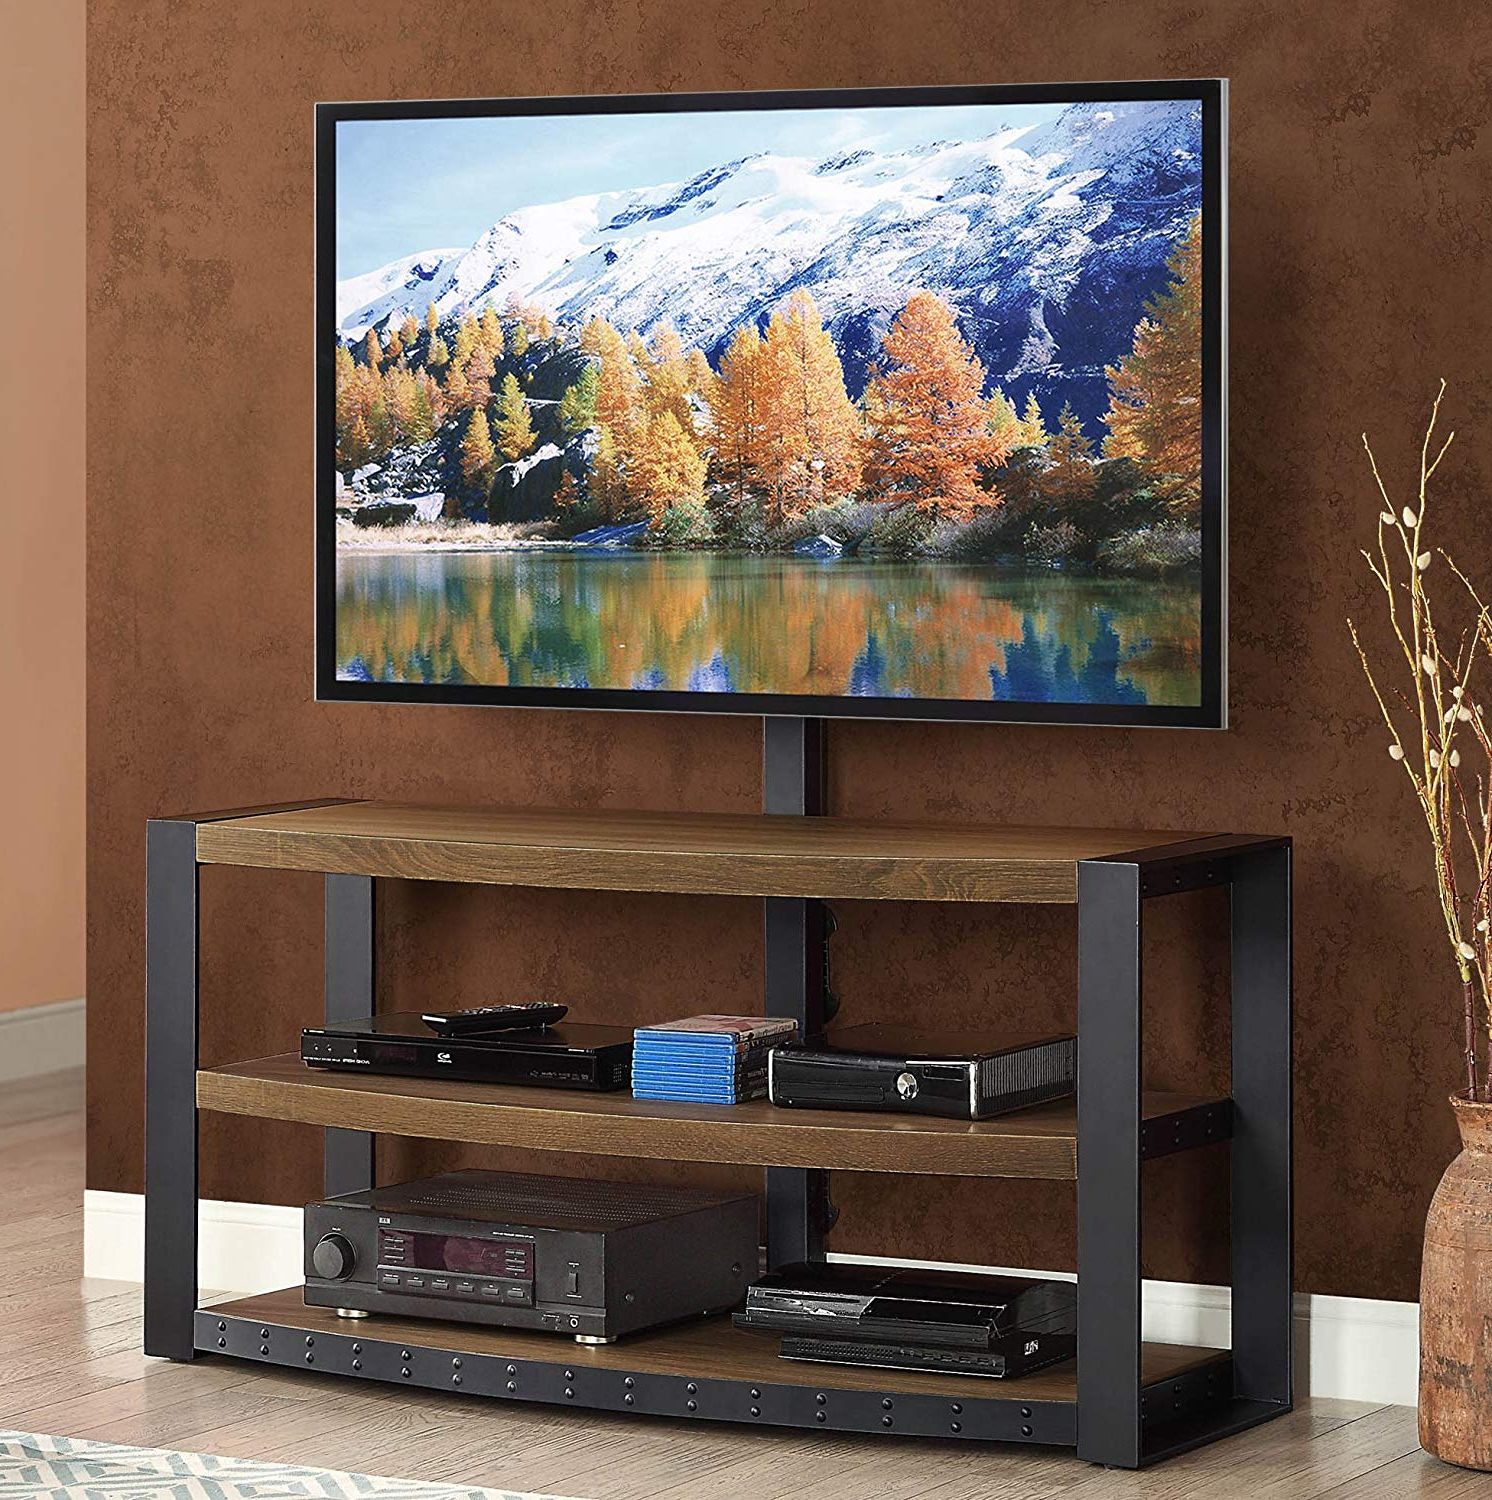 Amazon: Whalen Furniture Santa Fe 3 In 1 Tv Stand: Kitchen & Dining In Popular Walton 74 Inch Open Tv Stands (View 17 of 20)